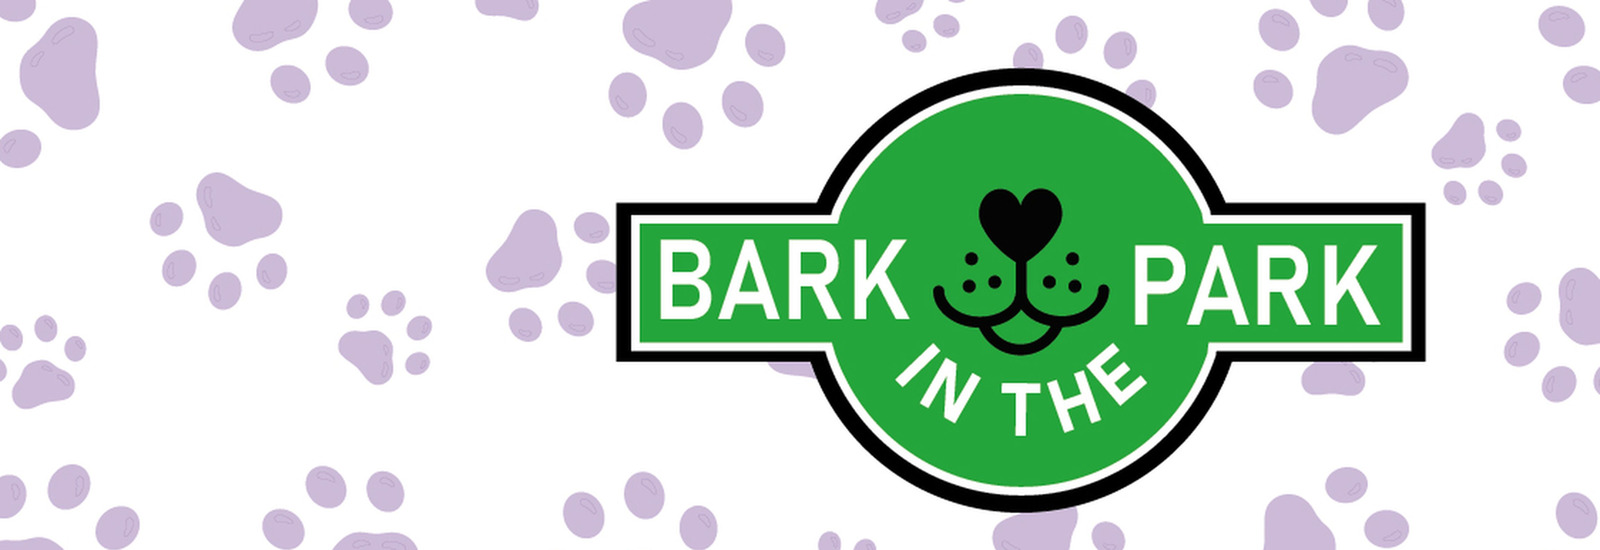 Bark in the Park event